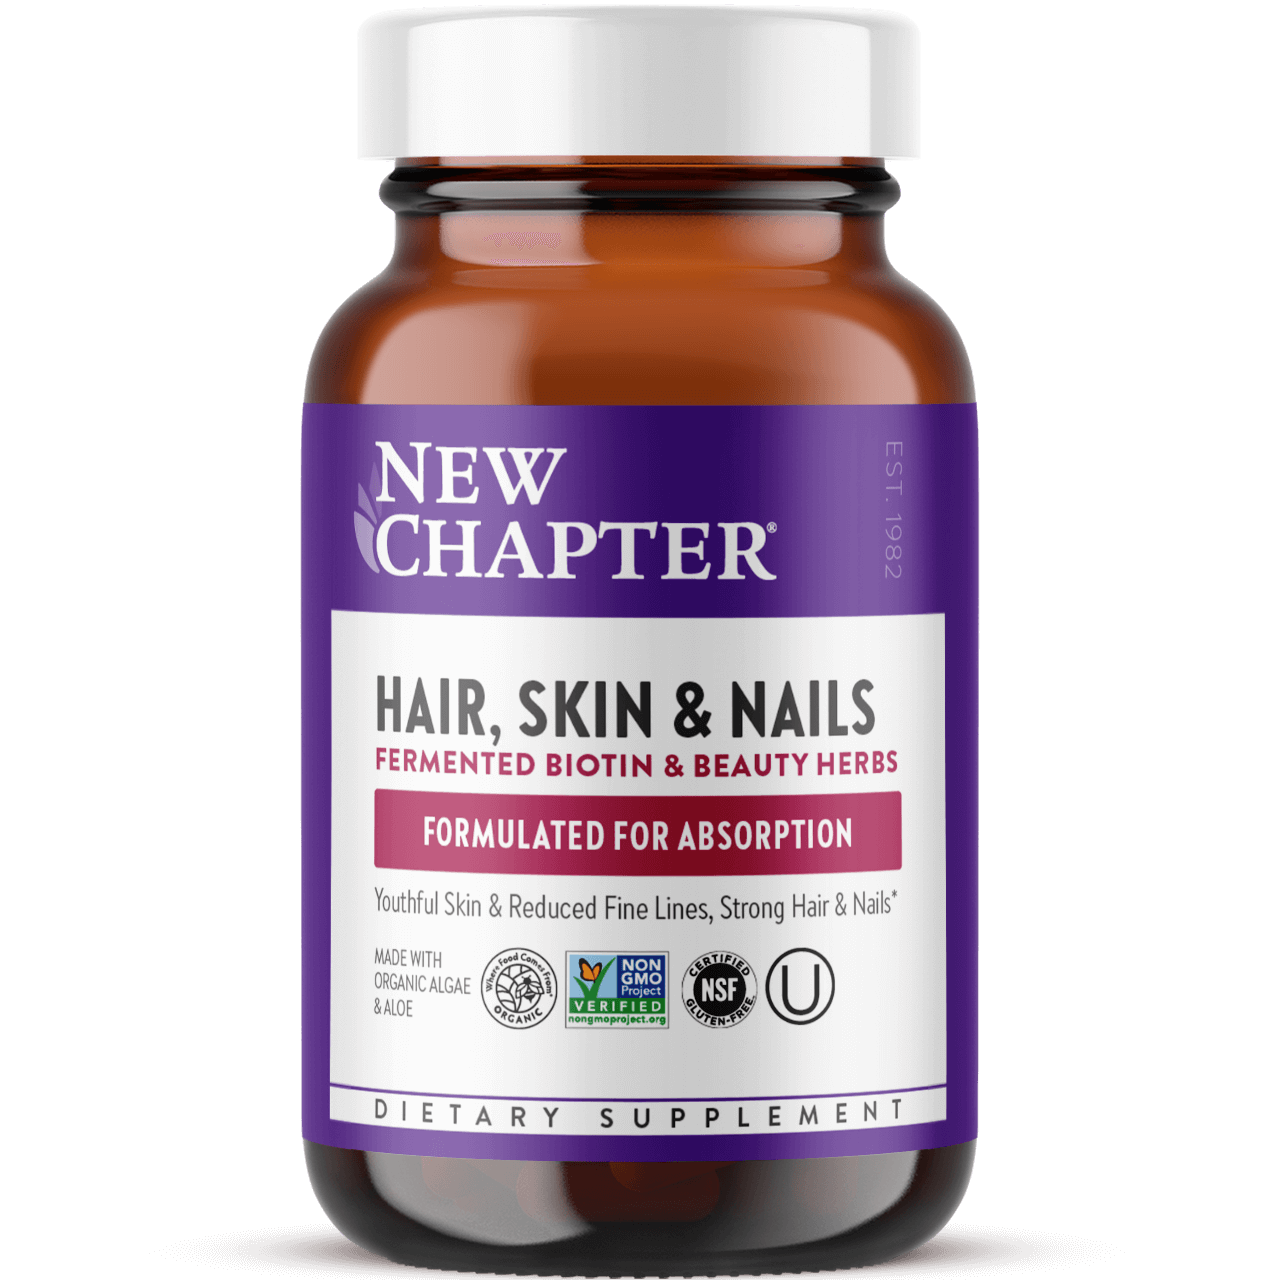 Amazon.com: Biotin Hair, Skin & Nails Vitamins for Women & Men. Includes  Vitamin C to Support Collagen. Supplements for Strong Hair, Radiant Skin & Nail  Growth. Biotin & Folate Supplement for Women.